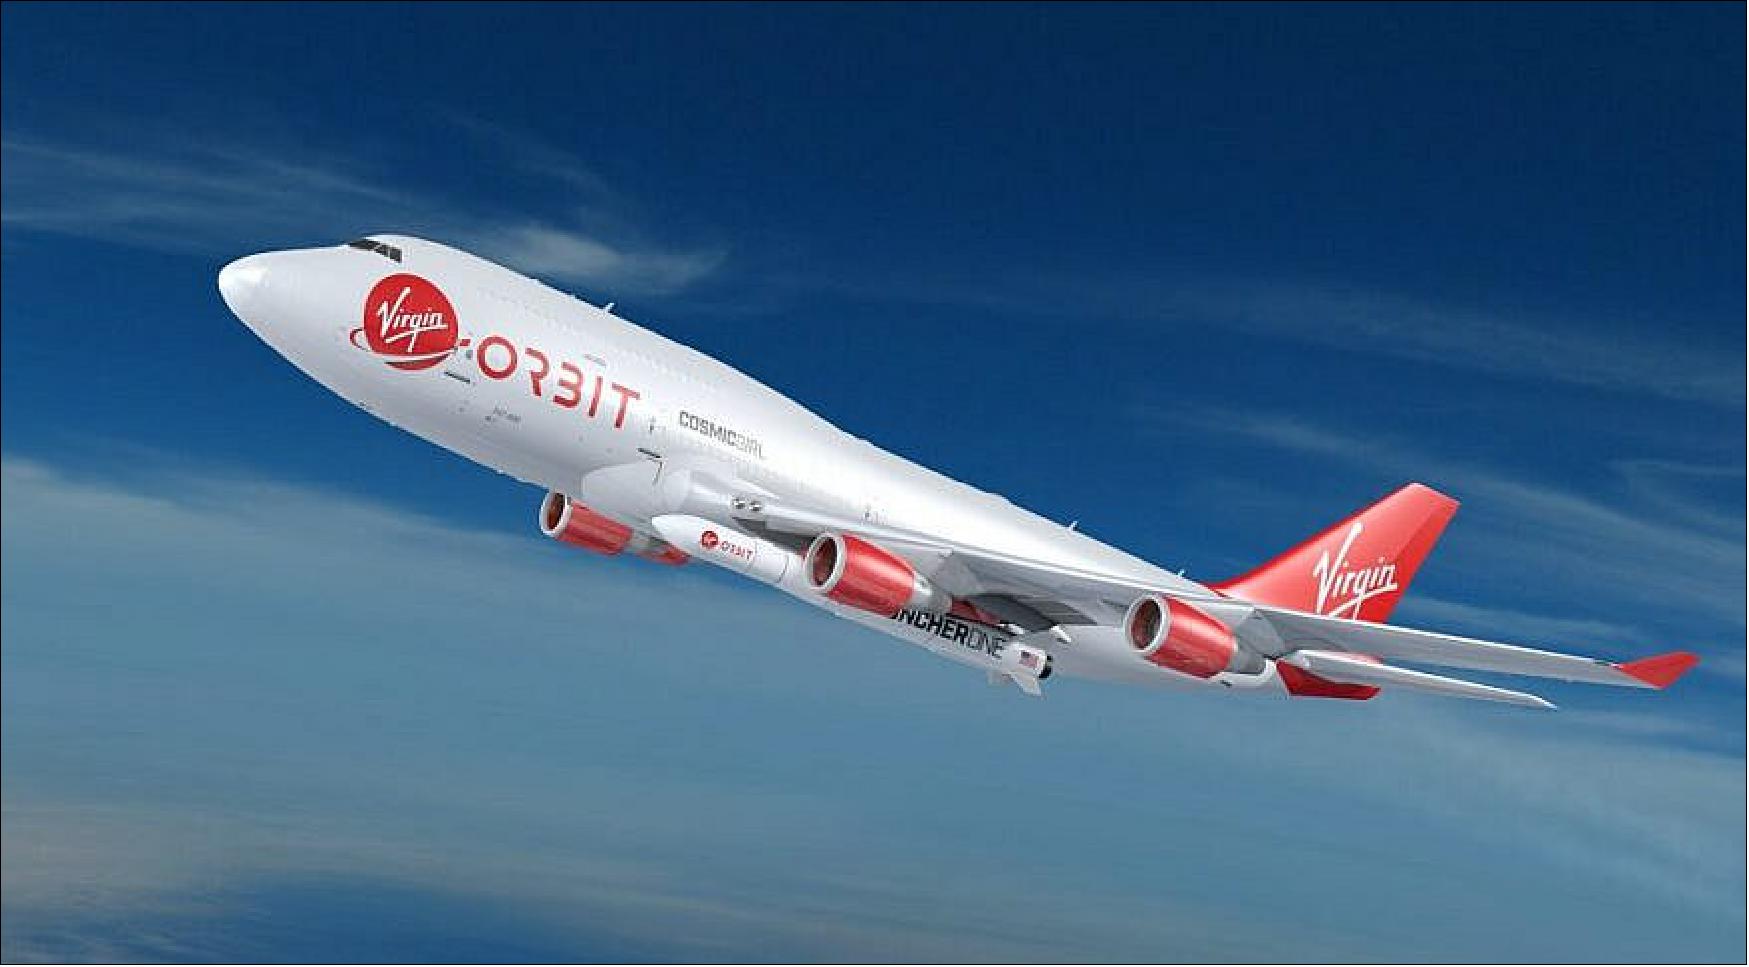 Figure 5: Virgin Orbit operates the air-launch LauncherOne system, which features a two-stage rocket launched from a Boeing 747 aircraft (image credit: Virgin Orbit)